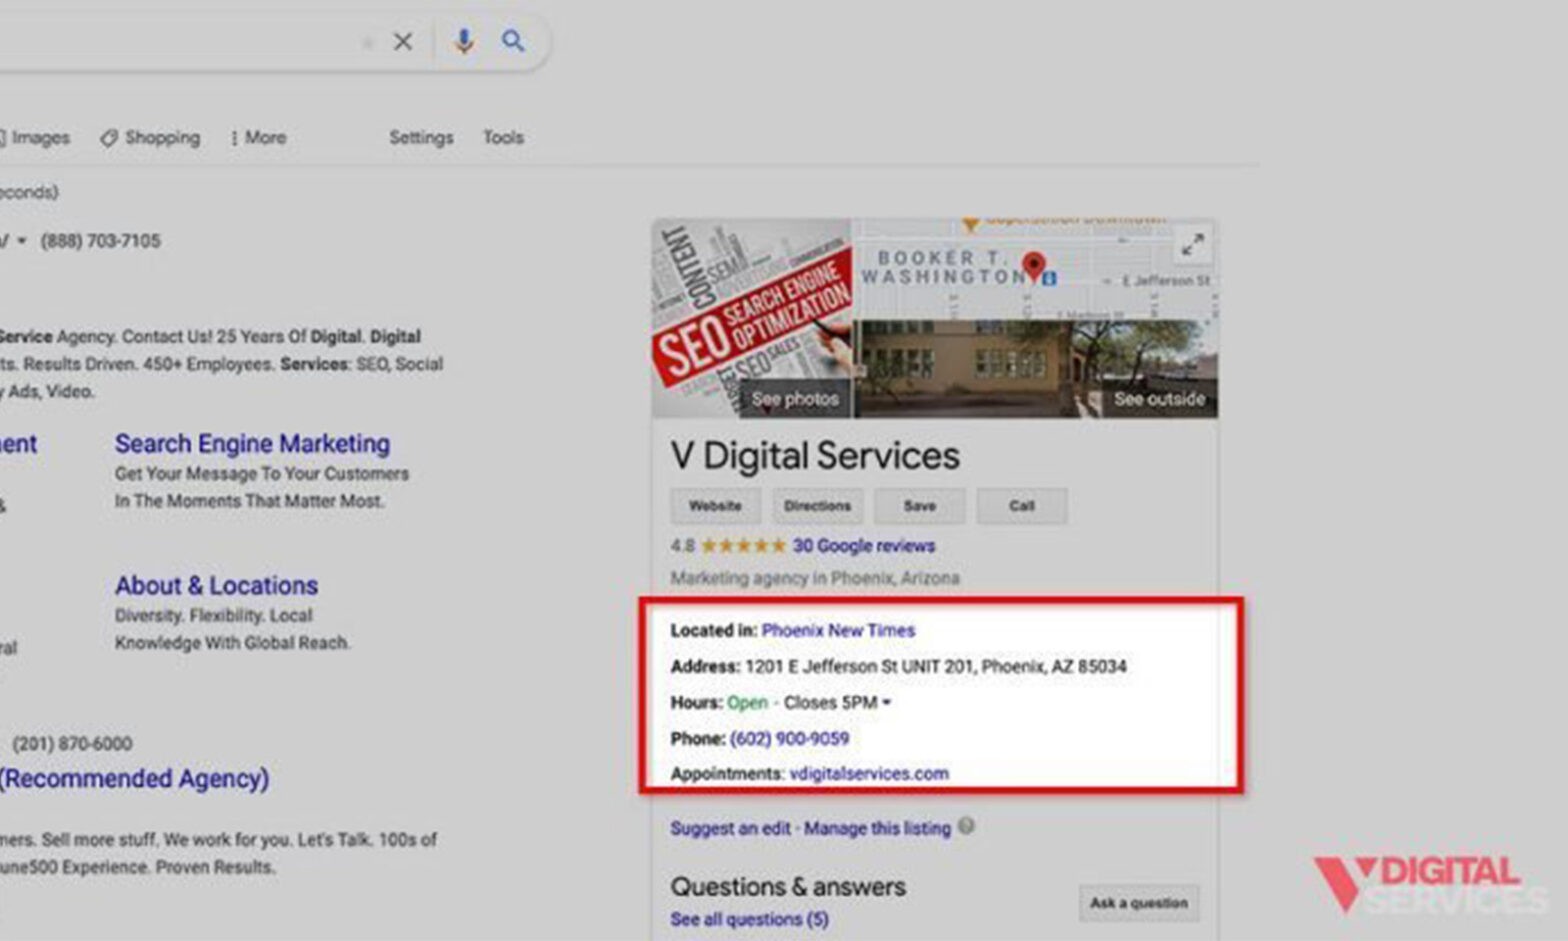 How to Acquire Local Search Citations to Improve Your Business SEO. Blog Post